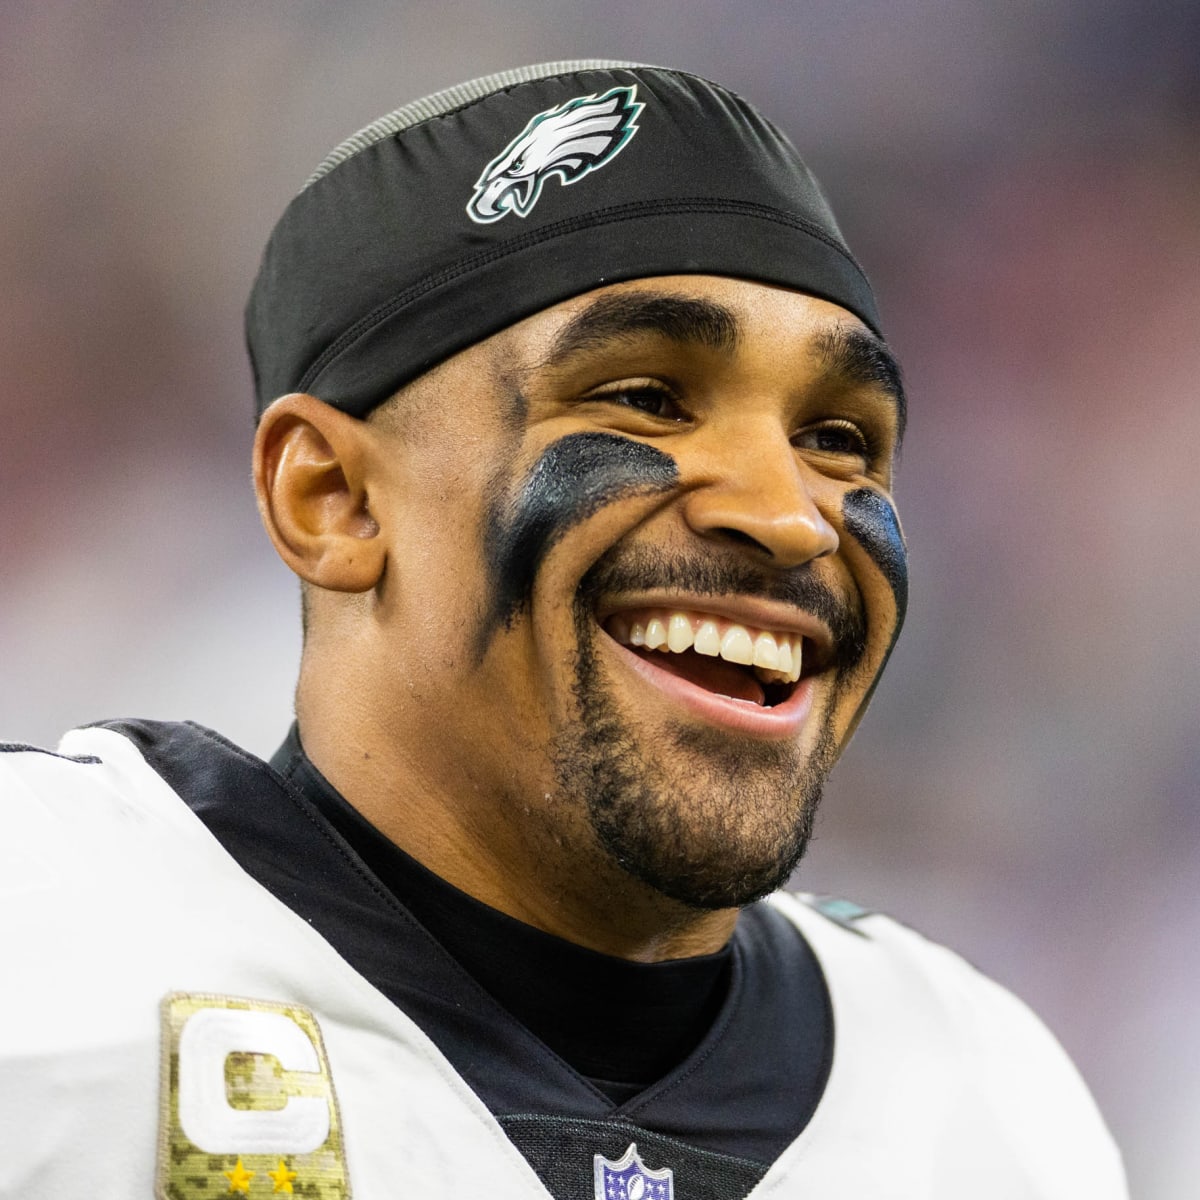 Philadelphia Eagles' present is better than its kelly green past